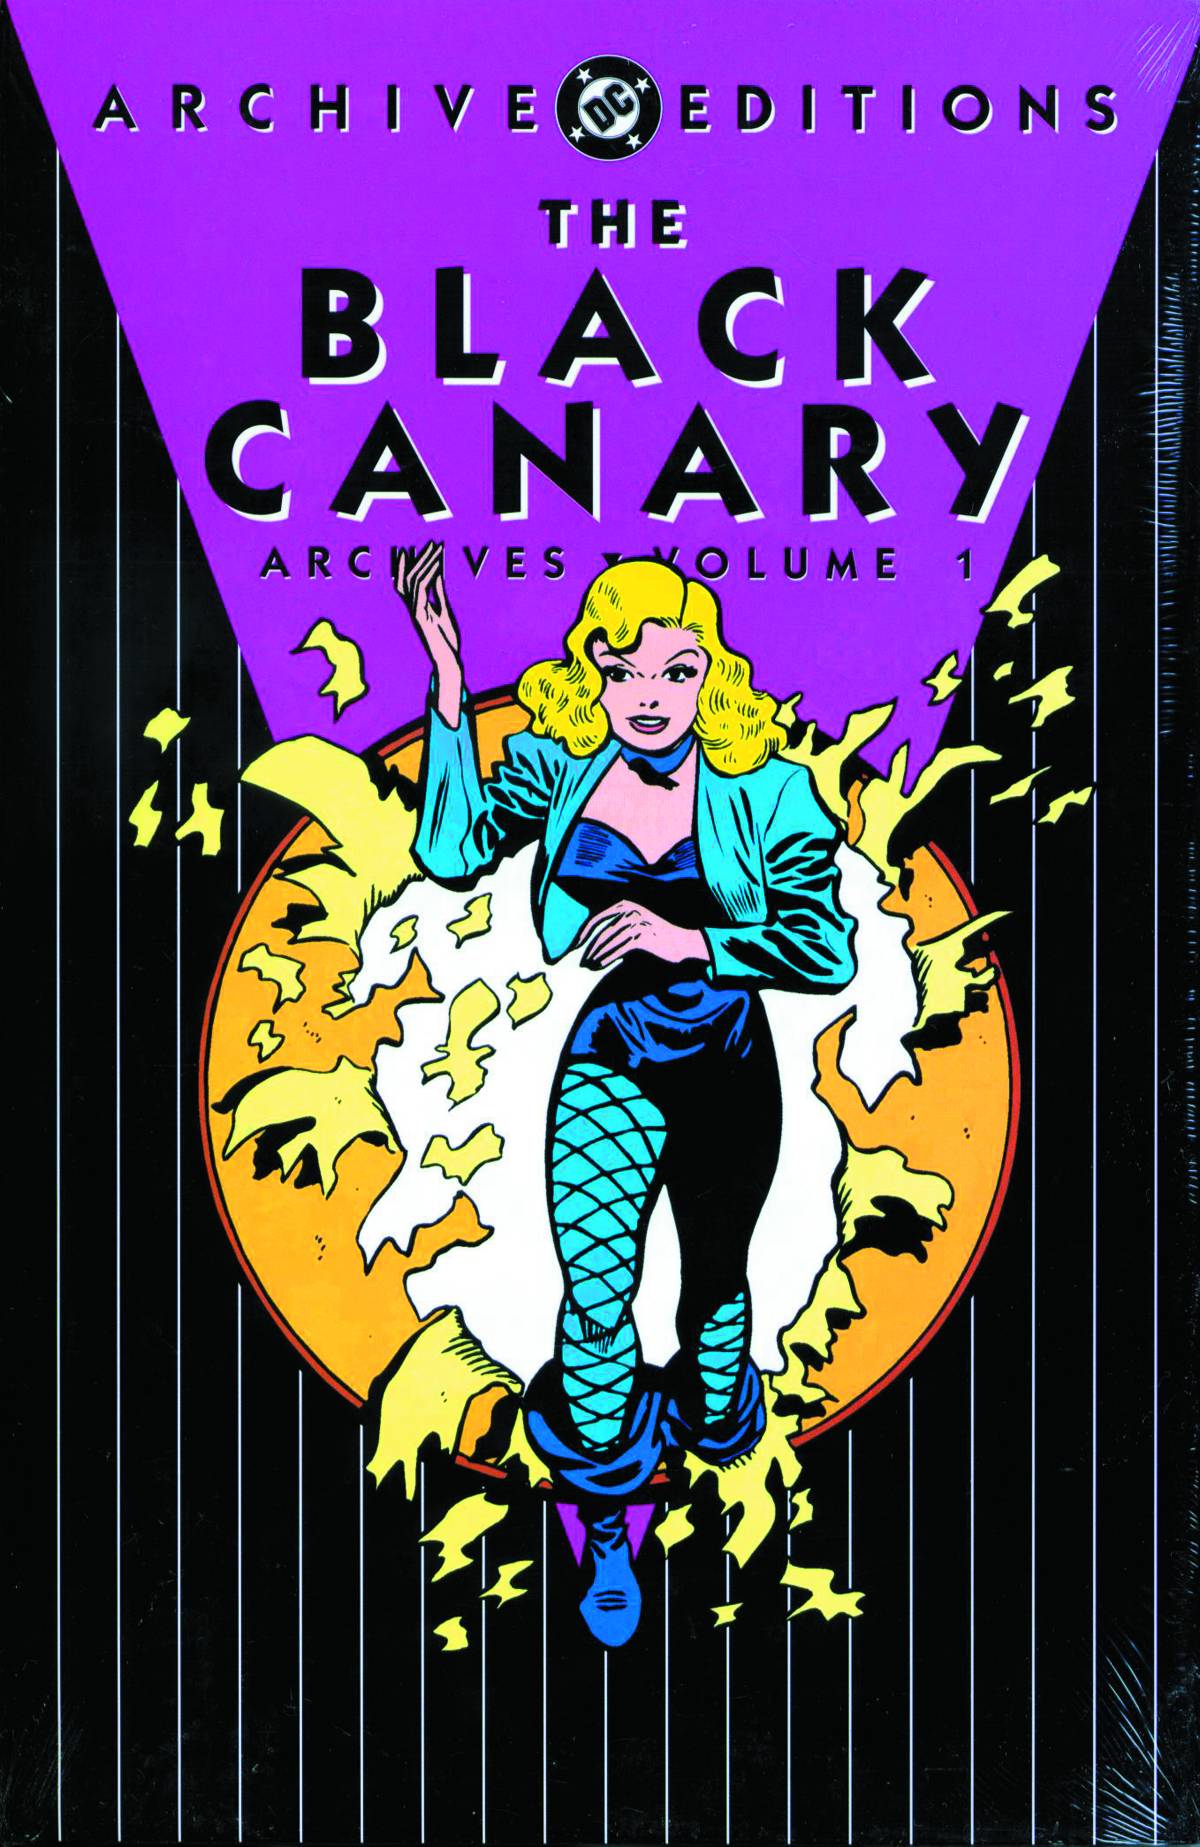 Black Canary Archives Hardcover Volume 1